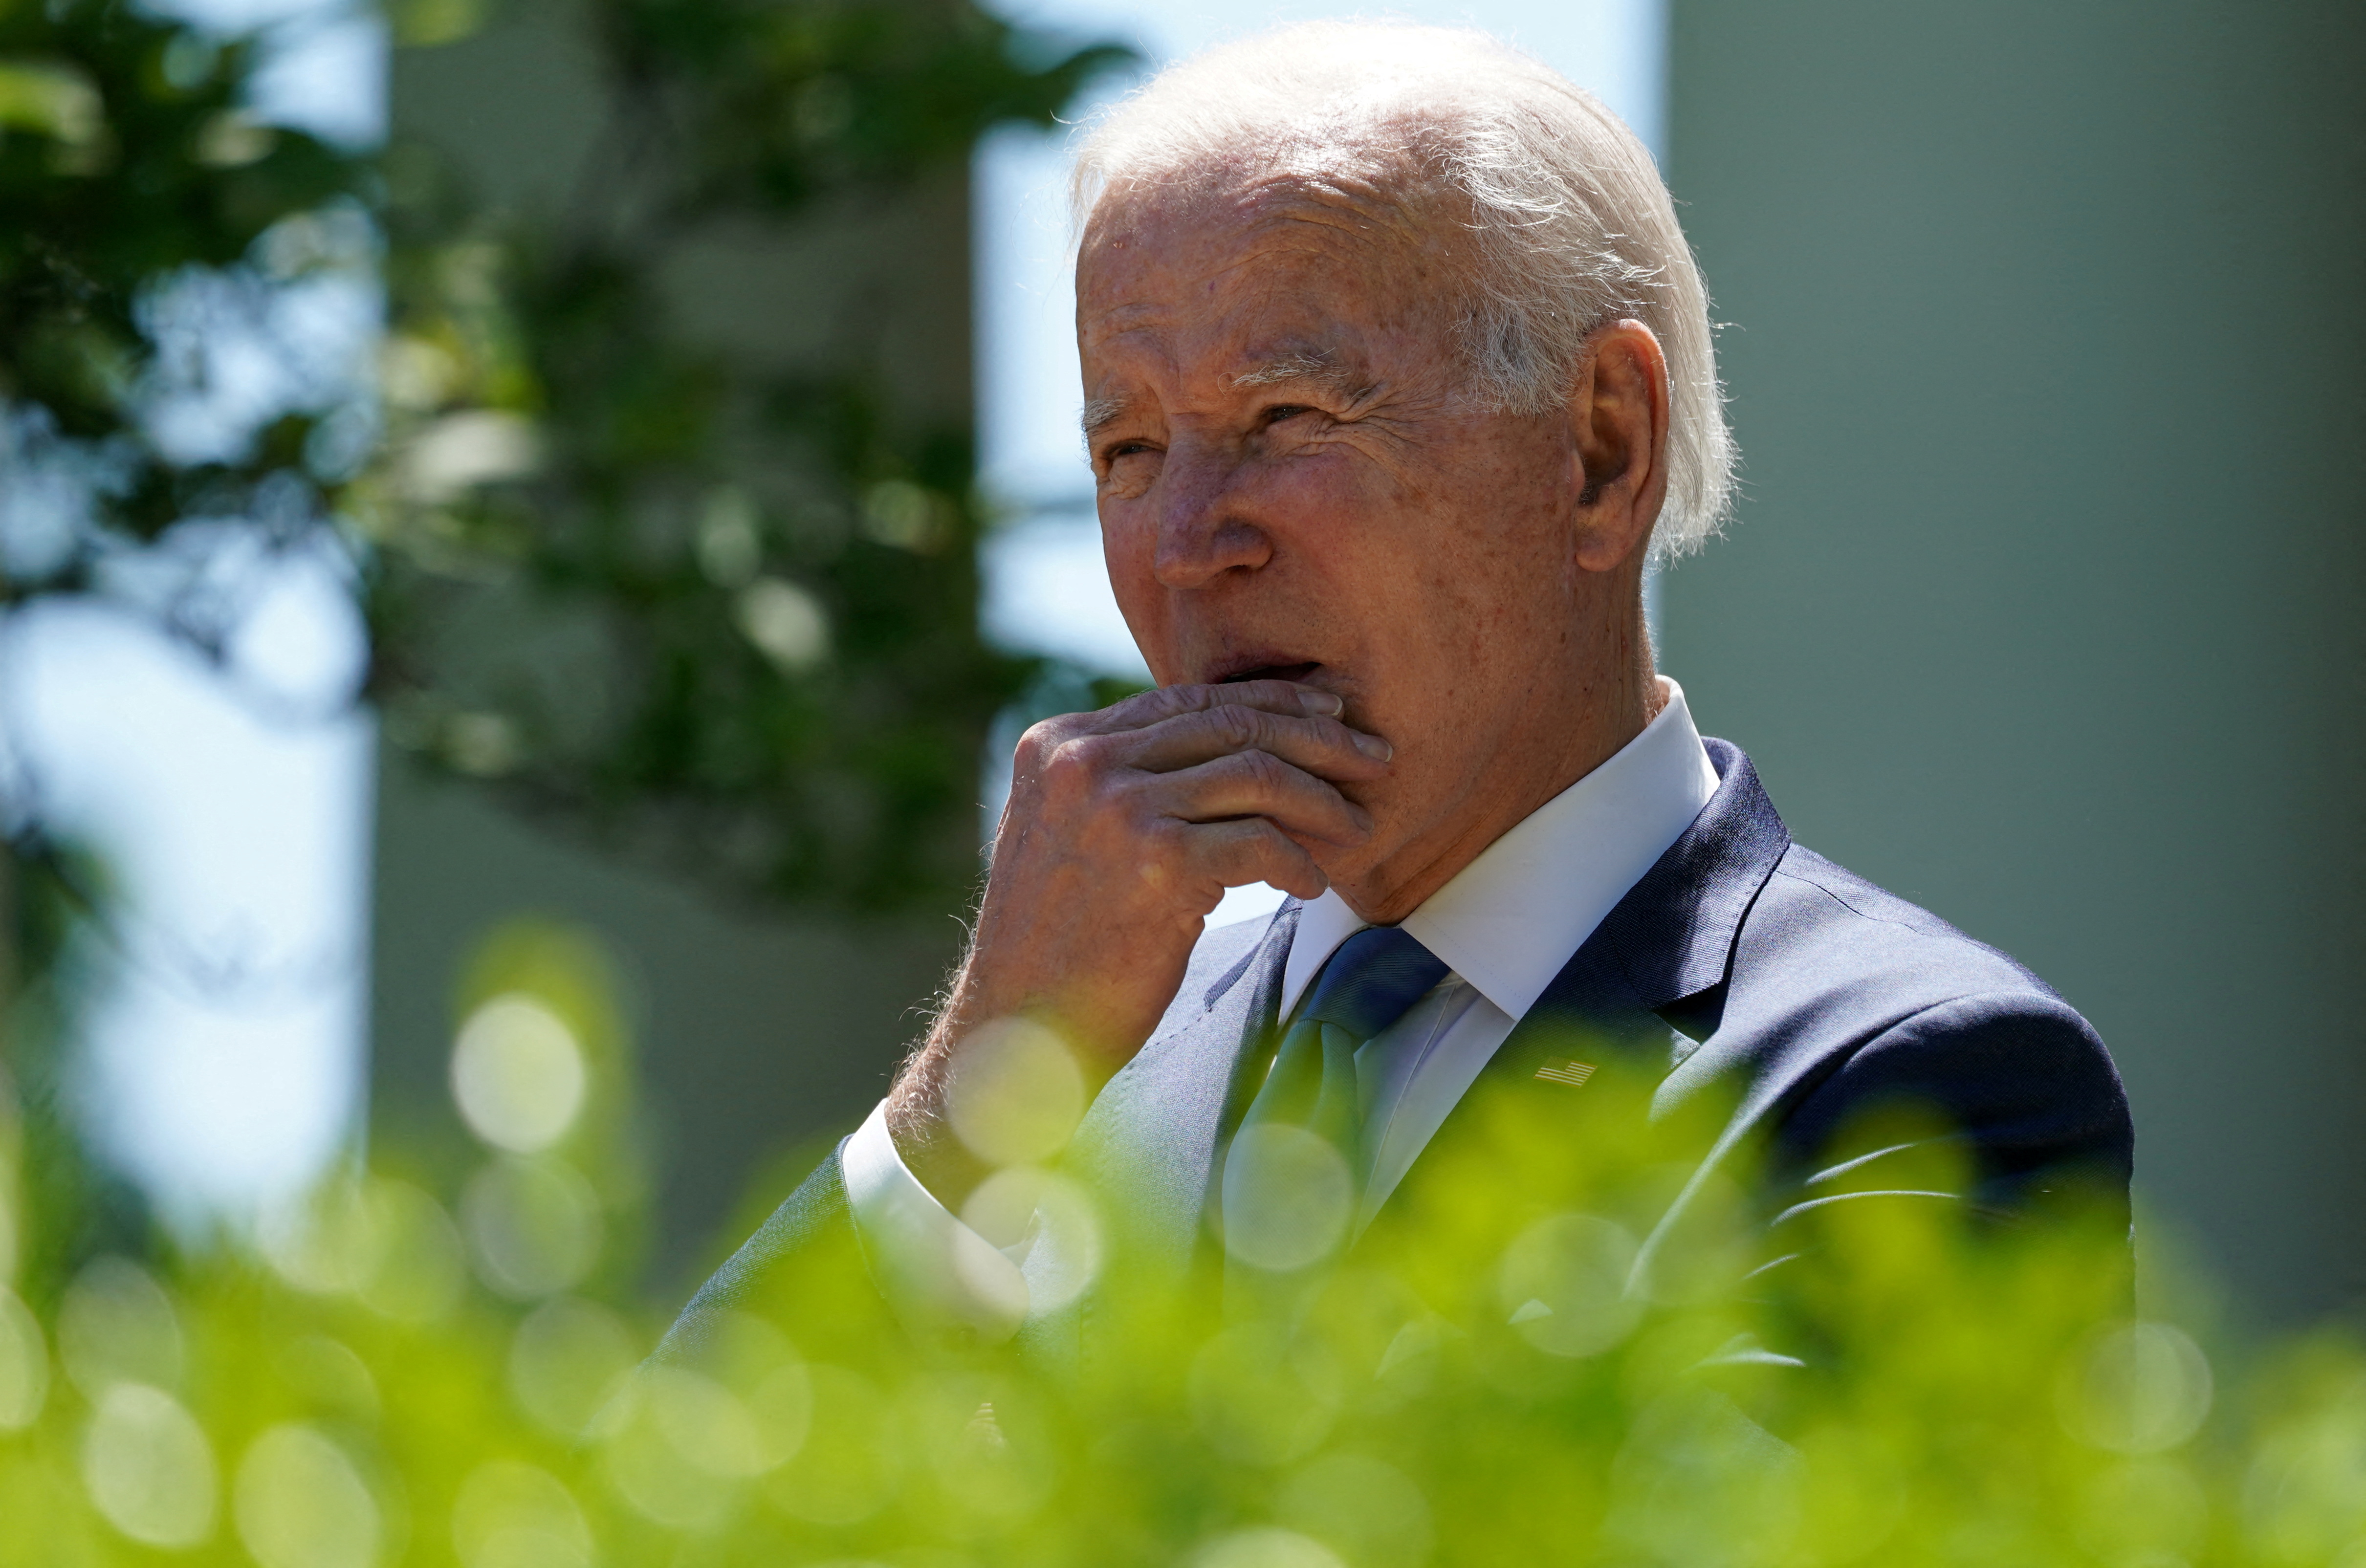 U.S. President Biden speaks about expanding high-speed internet access, during Rose Garden event at the White House in Washington